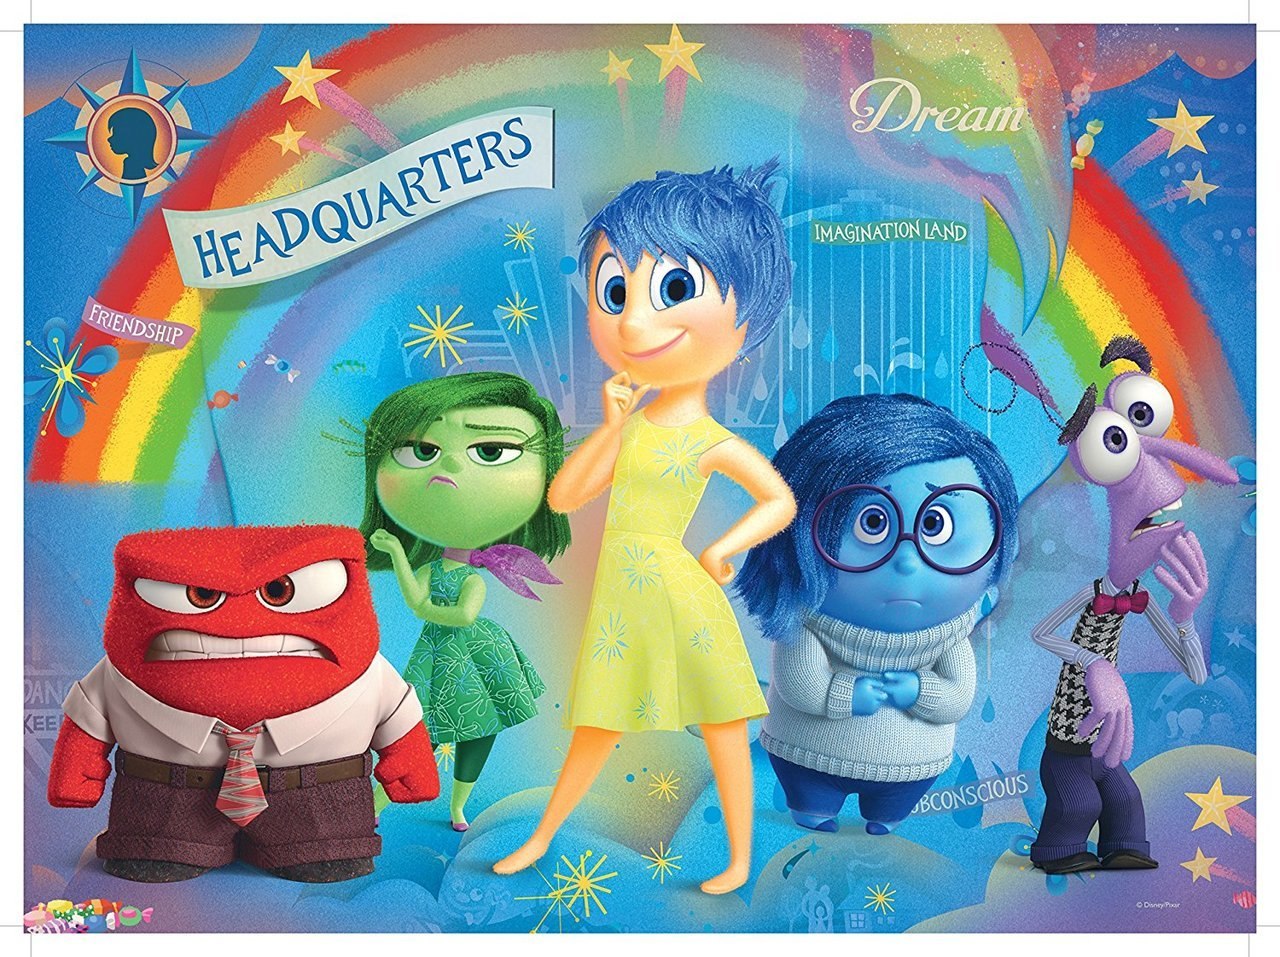 Disney Pixar: Inside Out Mixed Emotions - 100pc XXL Jigsaw Puzzle by Ravensburger